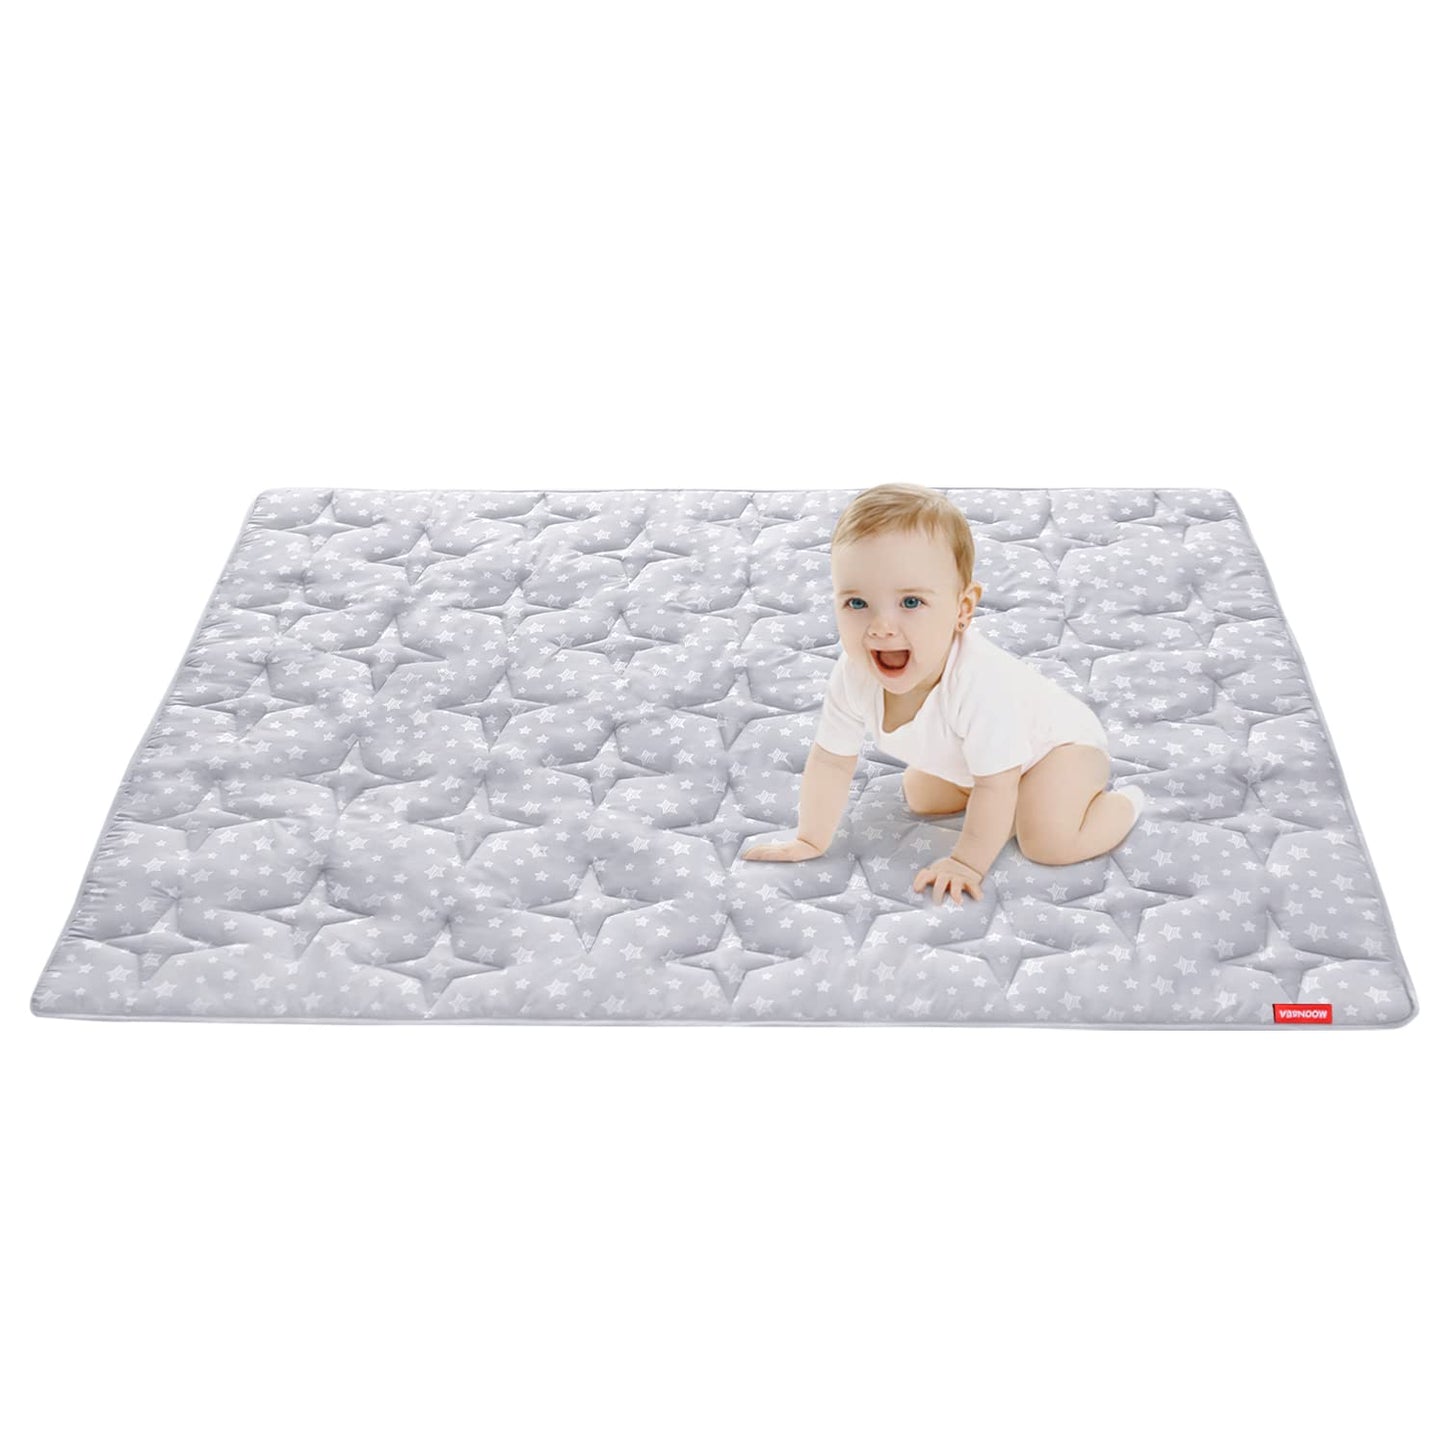 Baby Play Mat | Playpen Mat - Square 47" x 47", Large Padded Tummy Time Activity Mat for Infant & Toddler, Grey Star - Moonsea Bedding